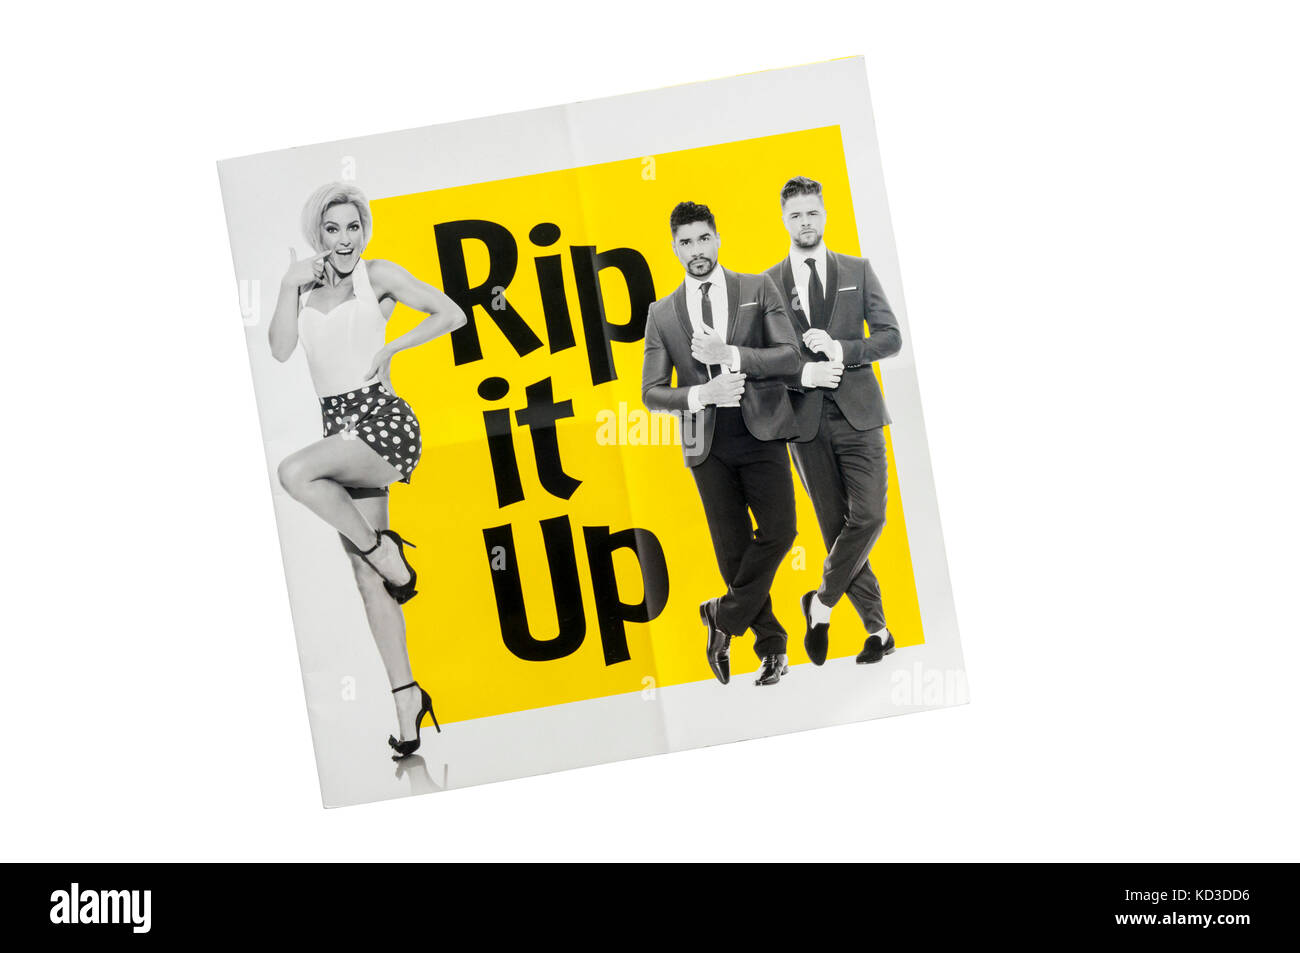 Programme for the 2017 production of Rip it Up at the London Palladium.  Featuring dance and music from the 1950s. Stock Photo